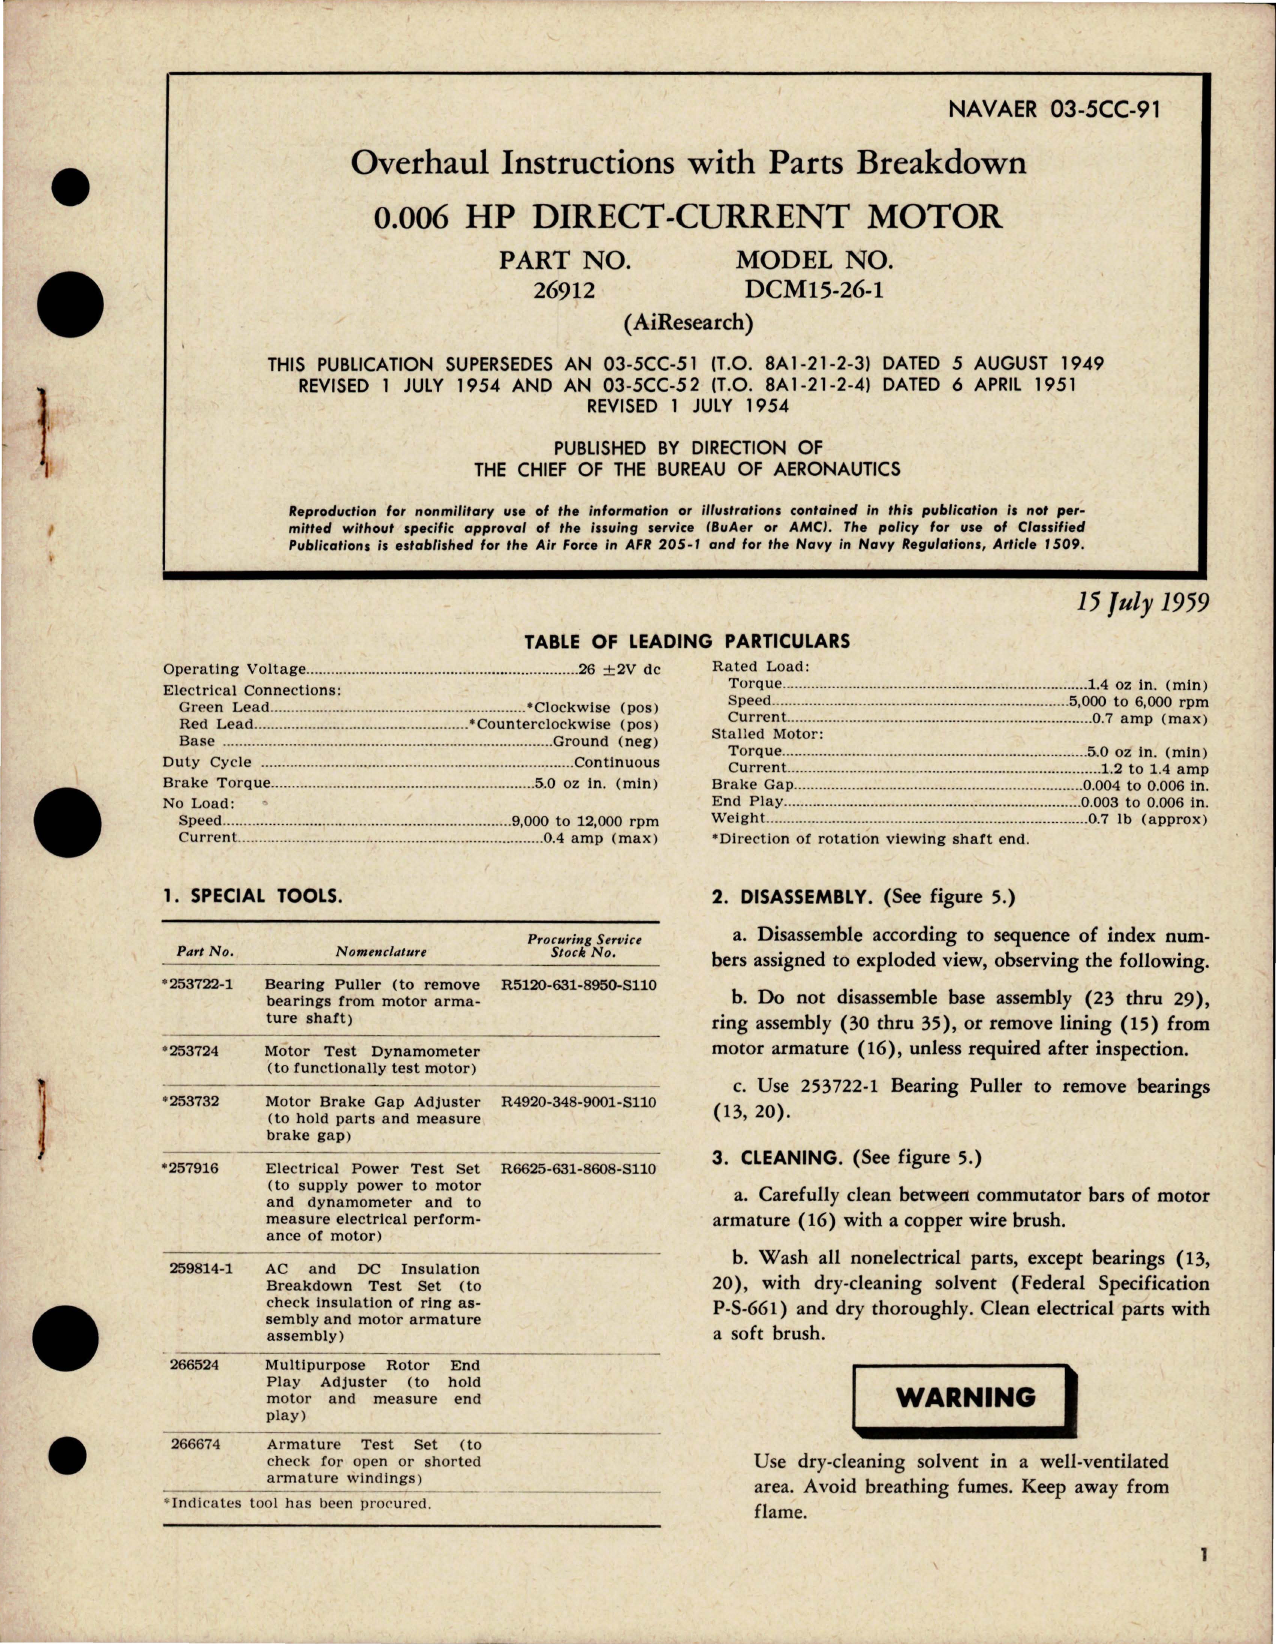 Sample page 1 from AirCorps Library document: Overhaul Instructions with Parts Breakdown for Direct Current Motor 0.006 HP - Part 26912 - Model DCM15-26-1